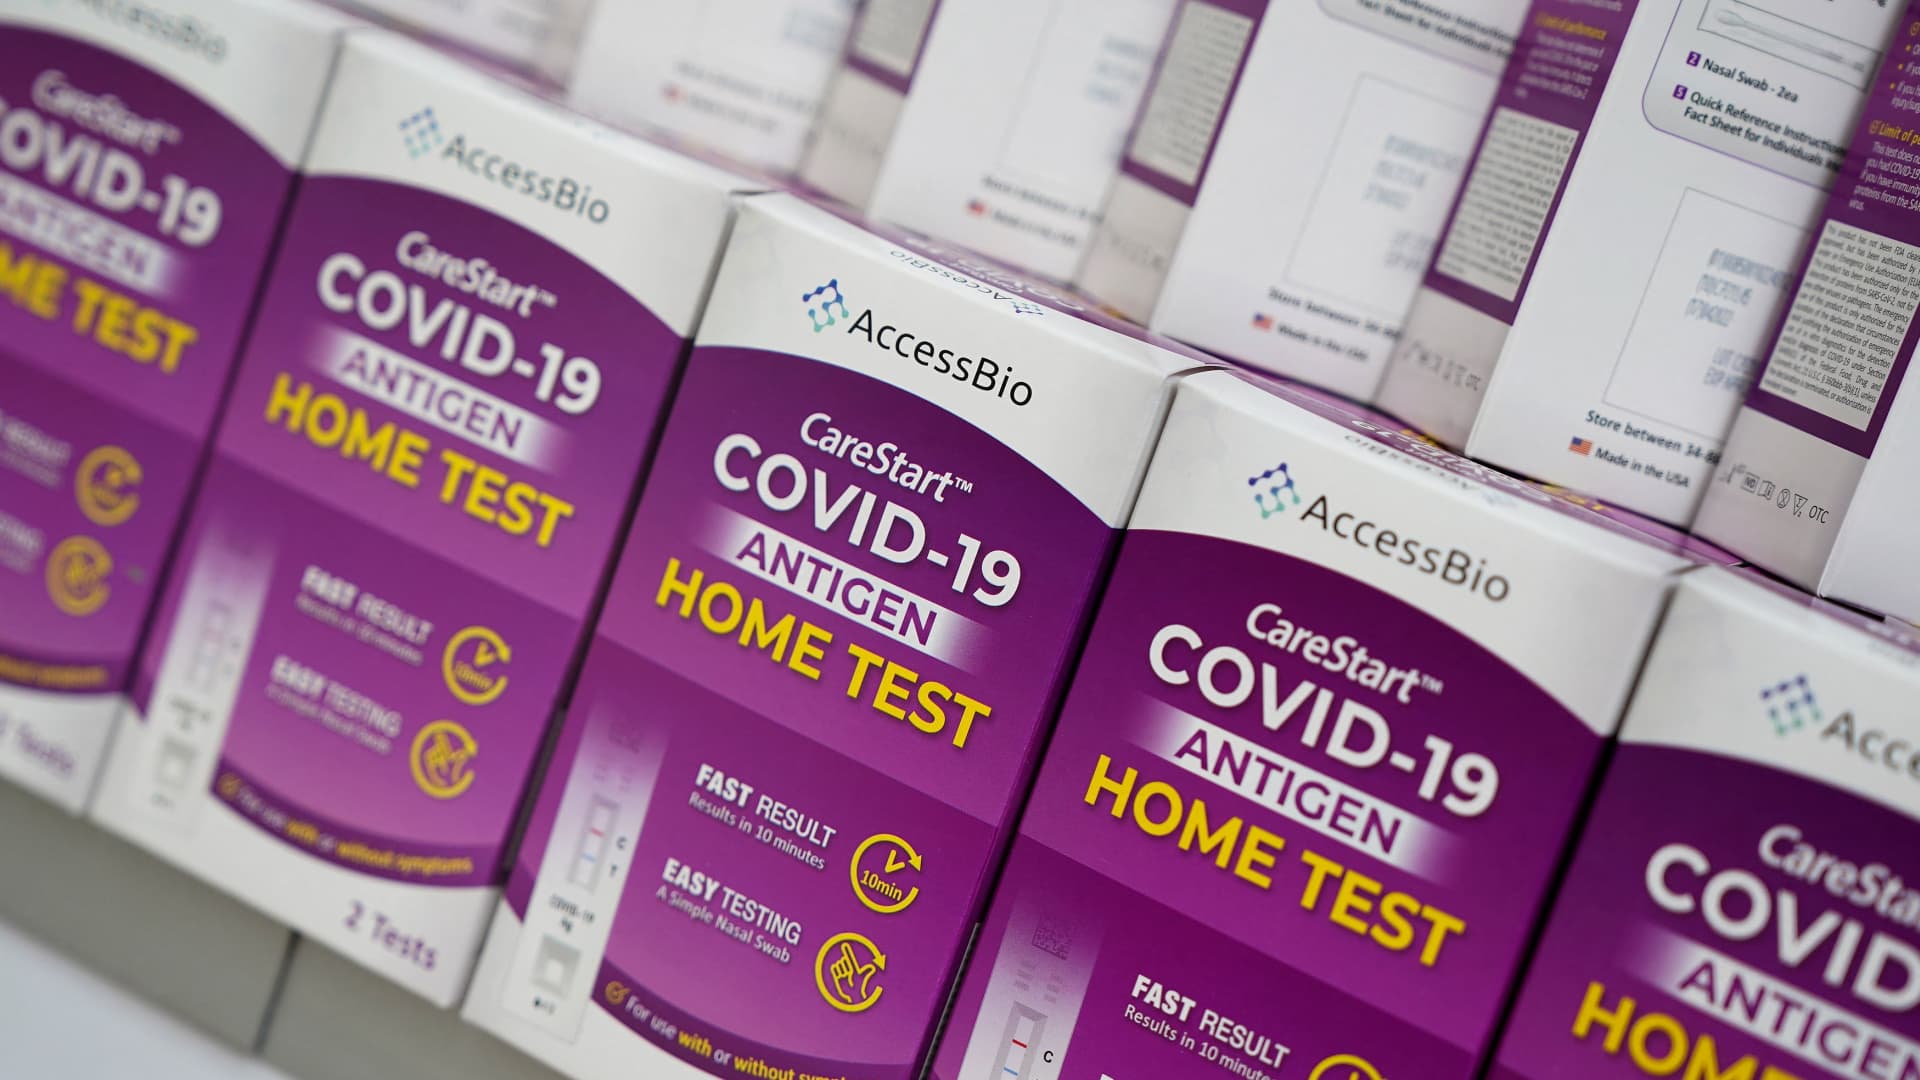 Free at home Covid tests available starting Monday